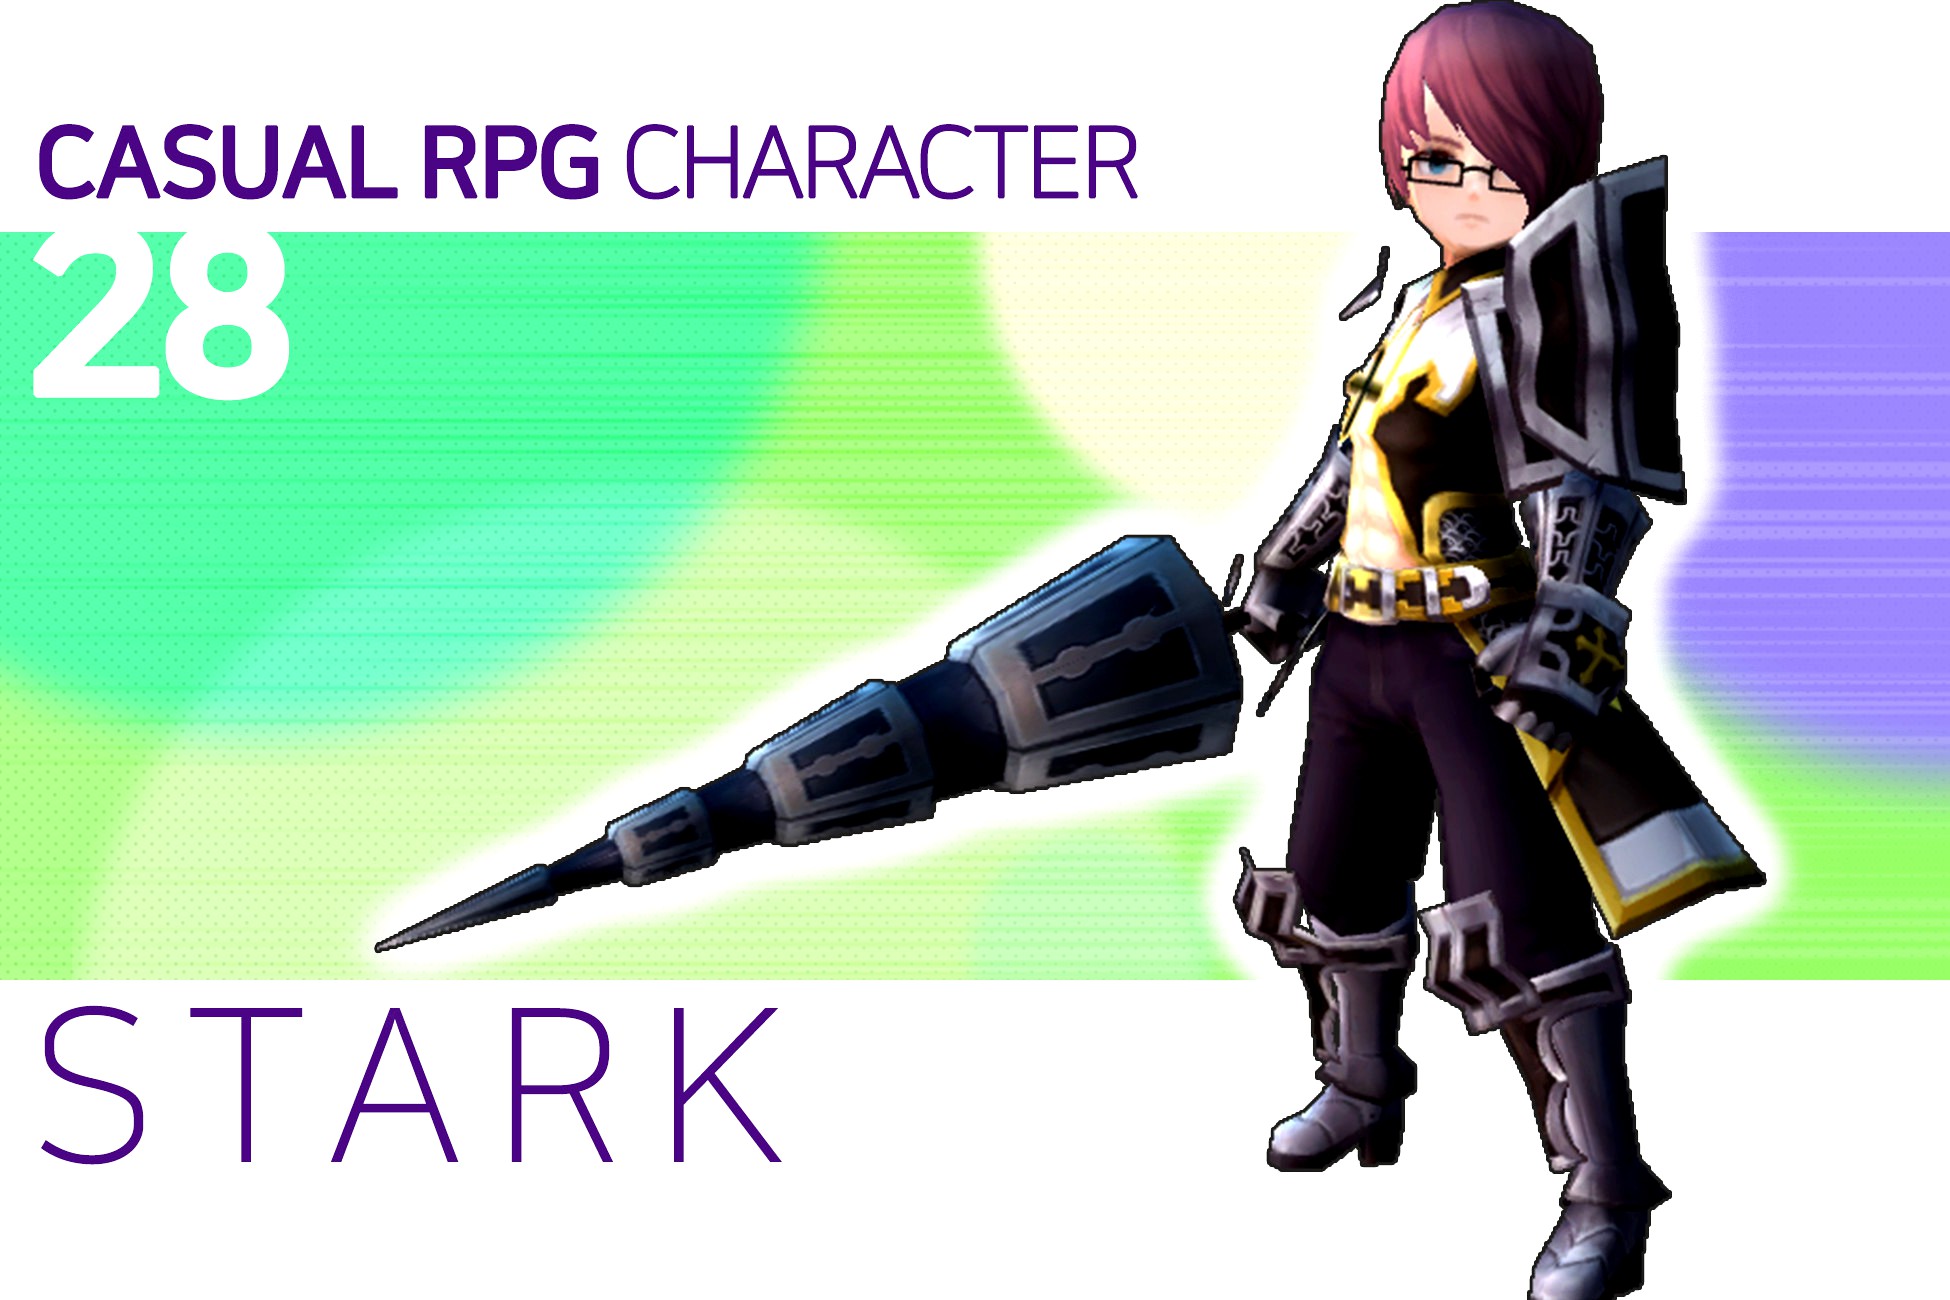 Casual RPG Character - 28 Stark